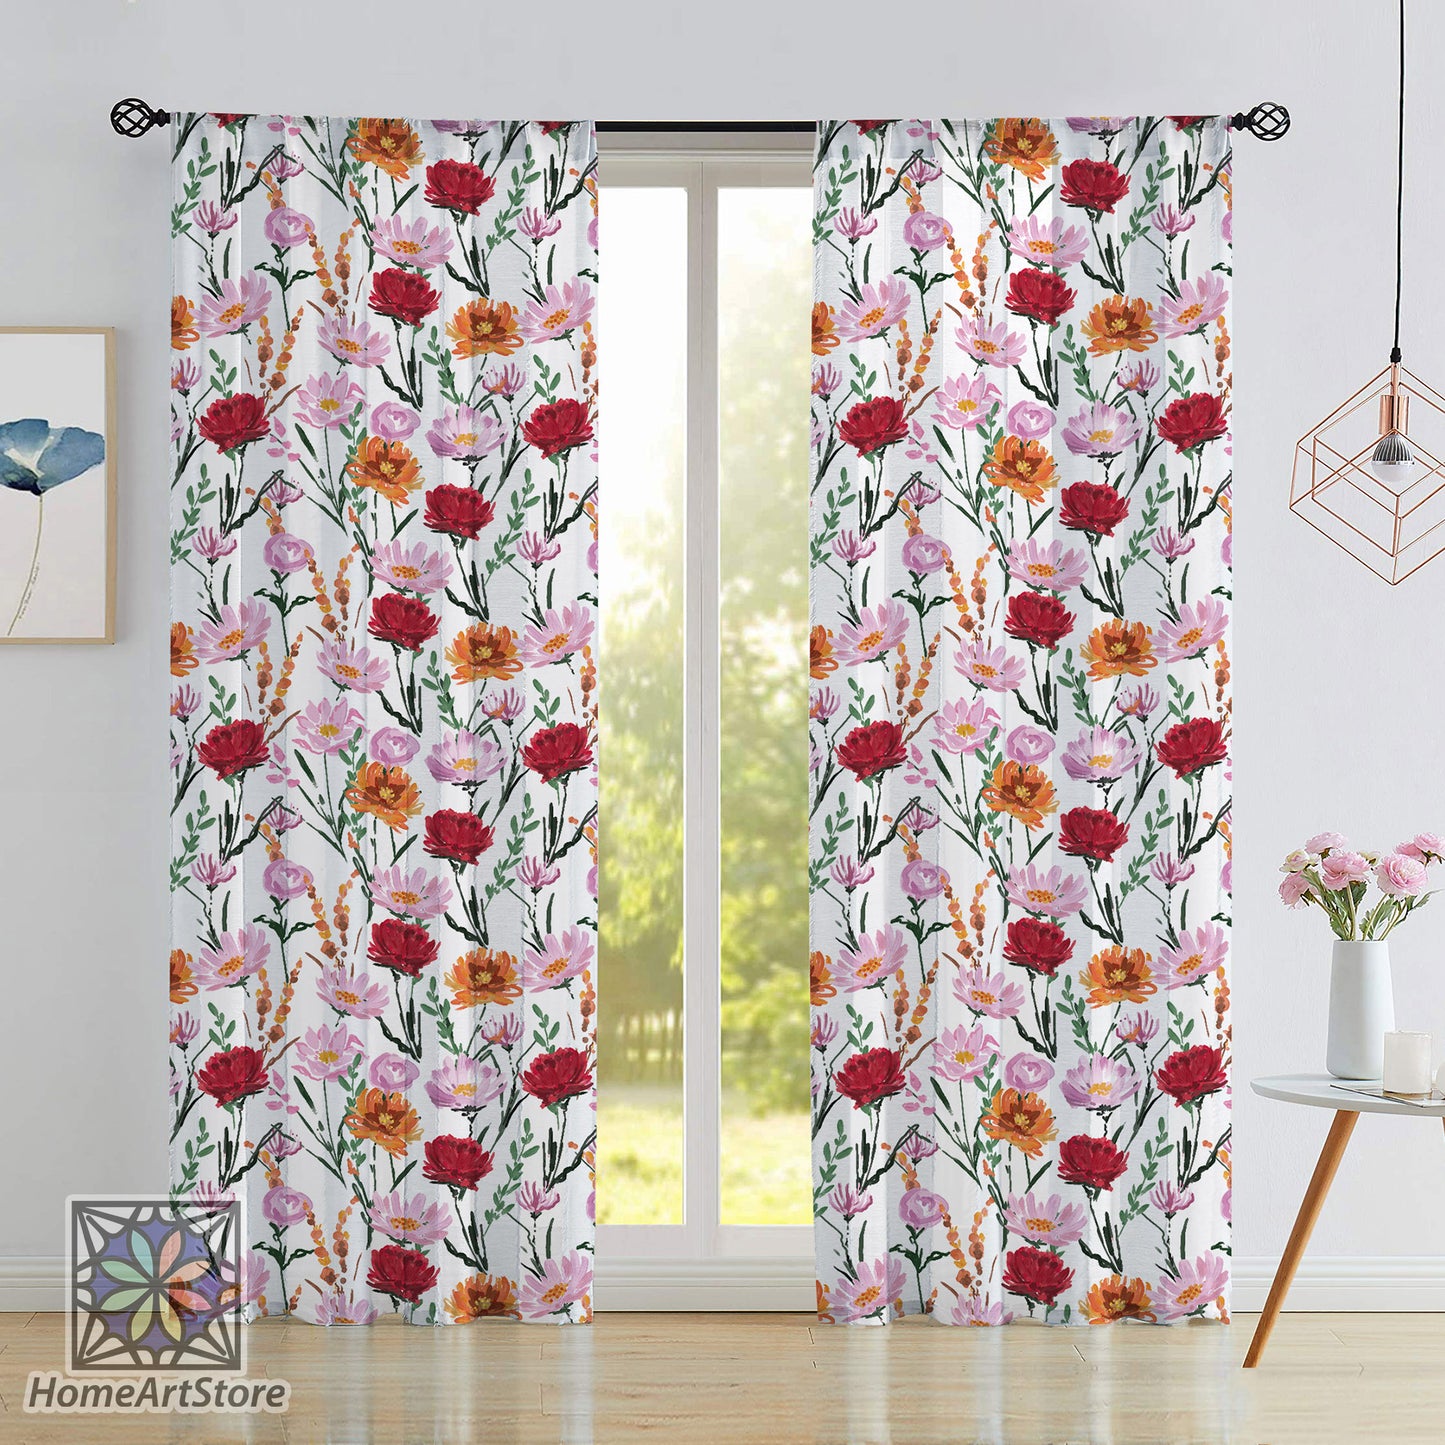 Garden Blooming Flowers Curtain, Floral Themed Curtain, Bohemian Decor, Colorful Kitchen Curtain